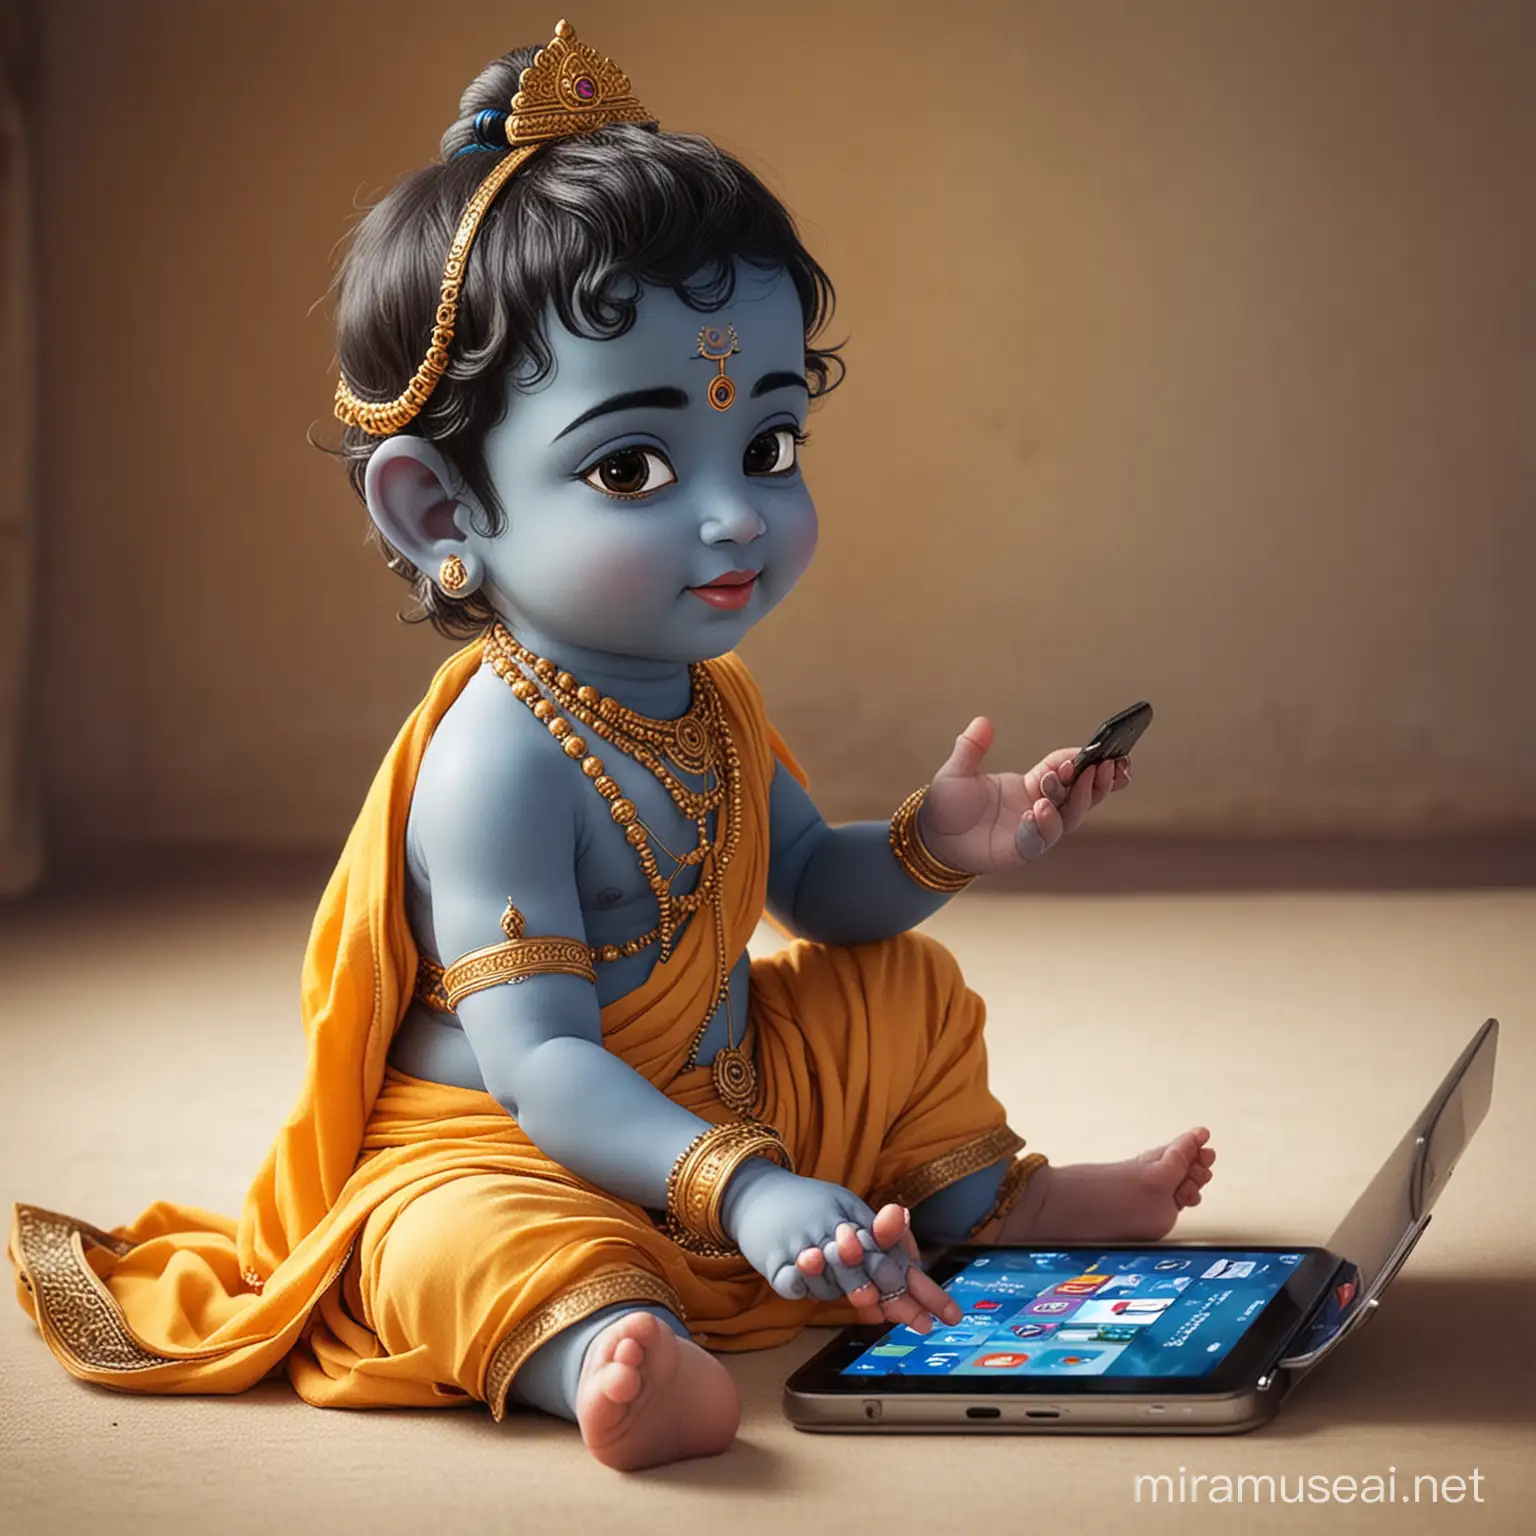 little  krishna playing with social media apps